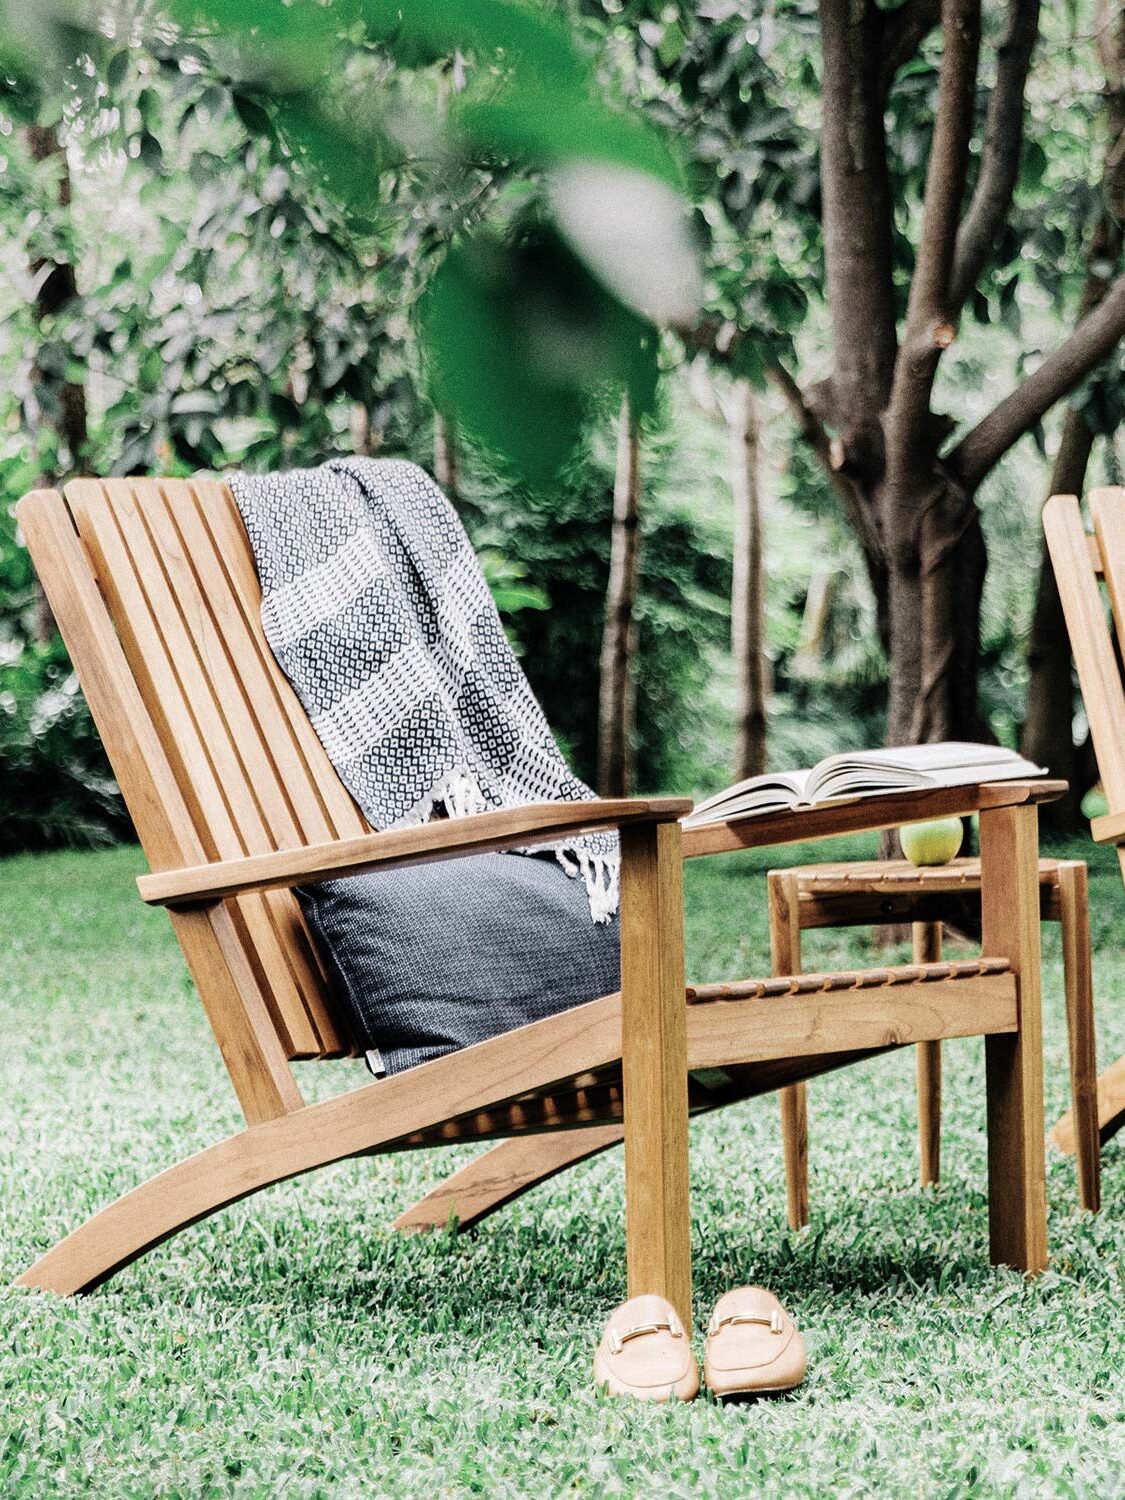 A wooden outdoor chair from MasayaCo.